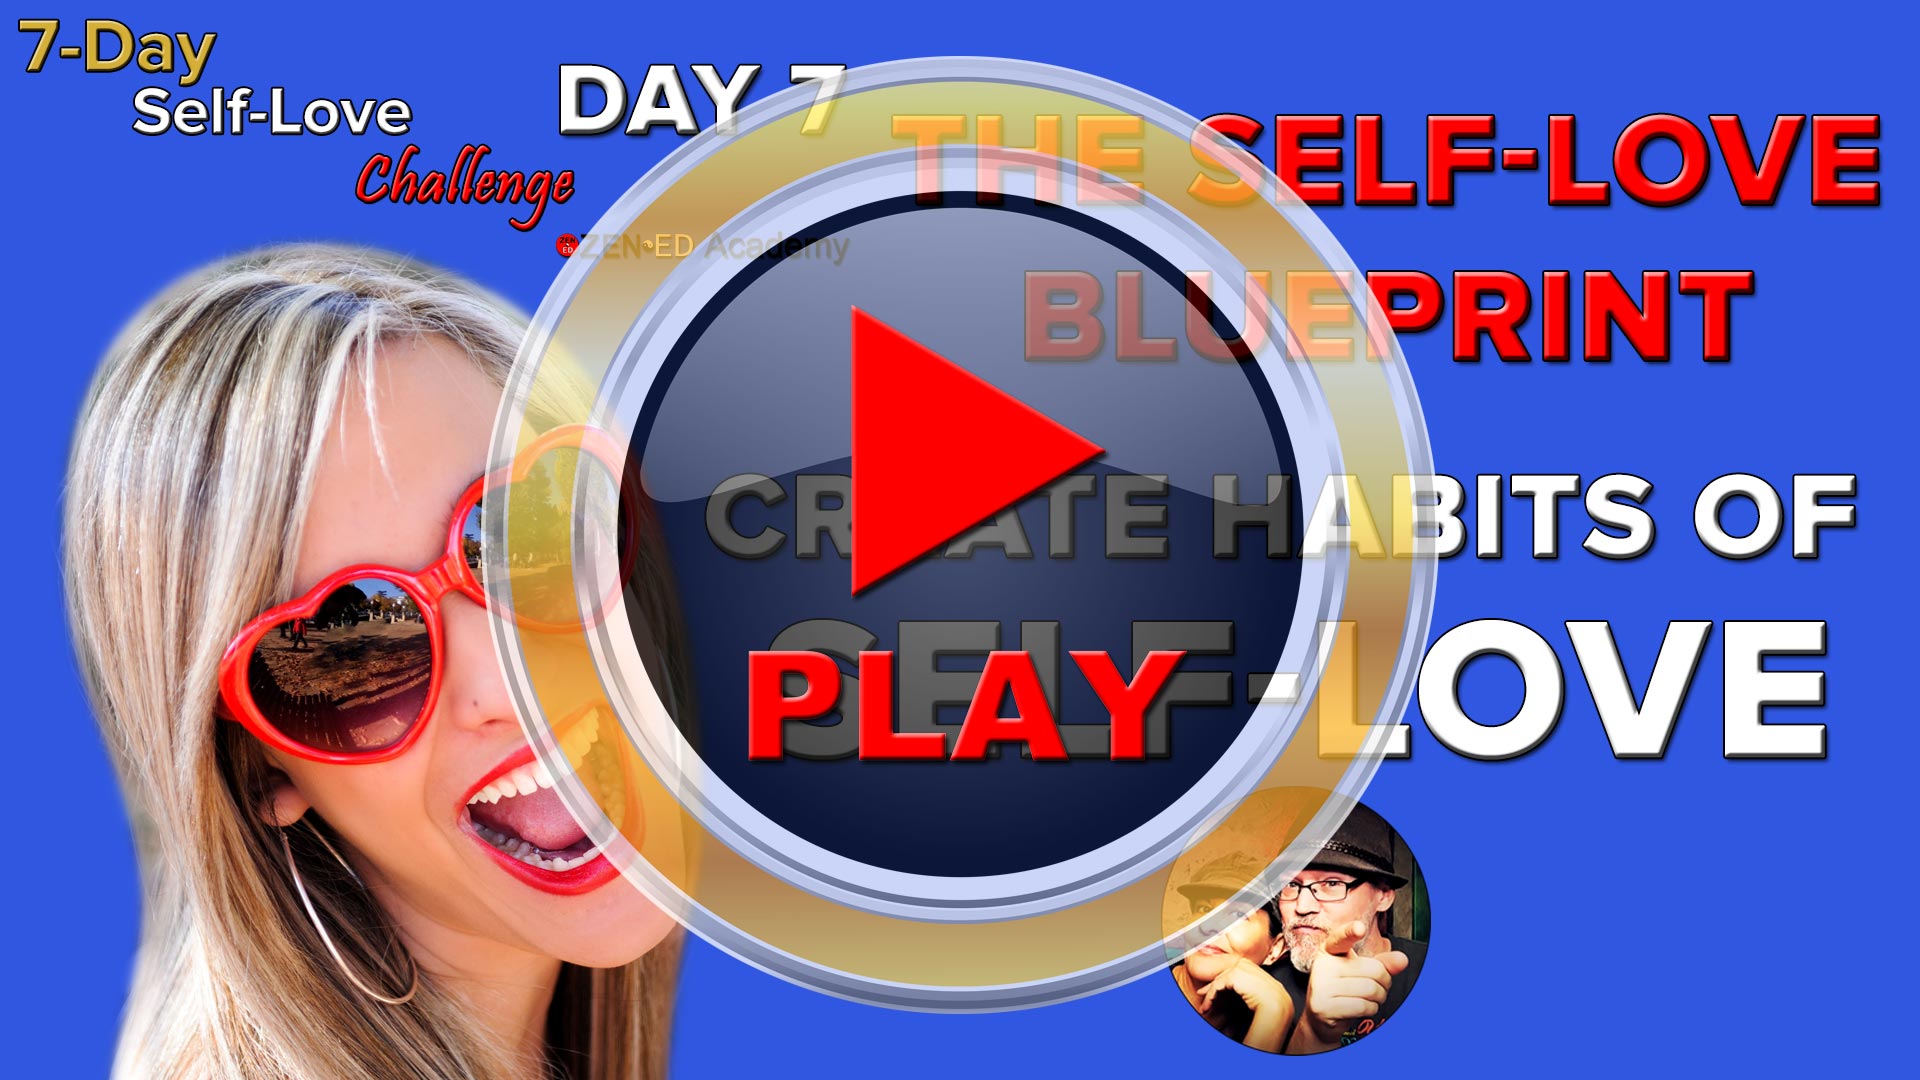 Play Video Day 7: The Self-Love Blueprint: Create Habits Of Self-Love (Thumbnail) Zen Ed Academy's Free 7-Day Self-Love Challenge